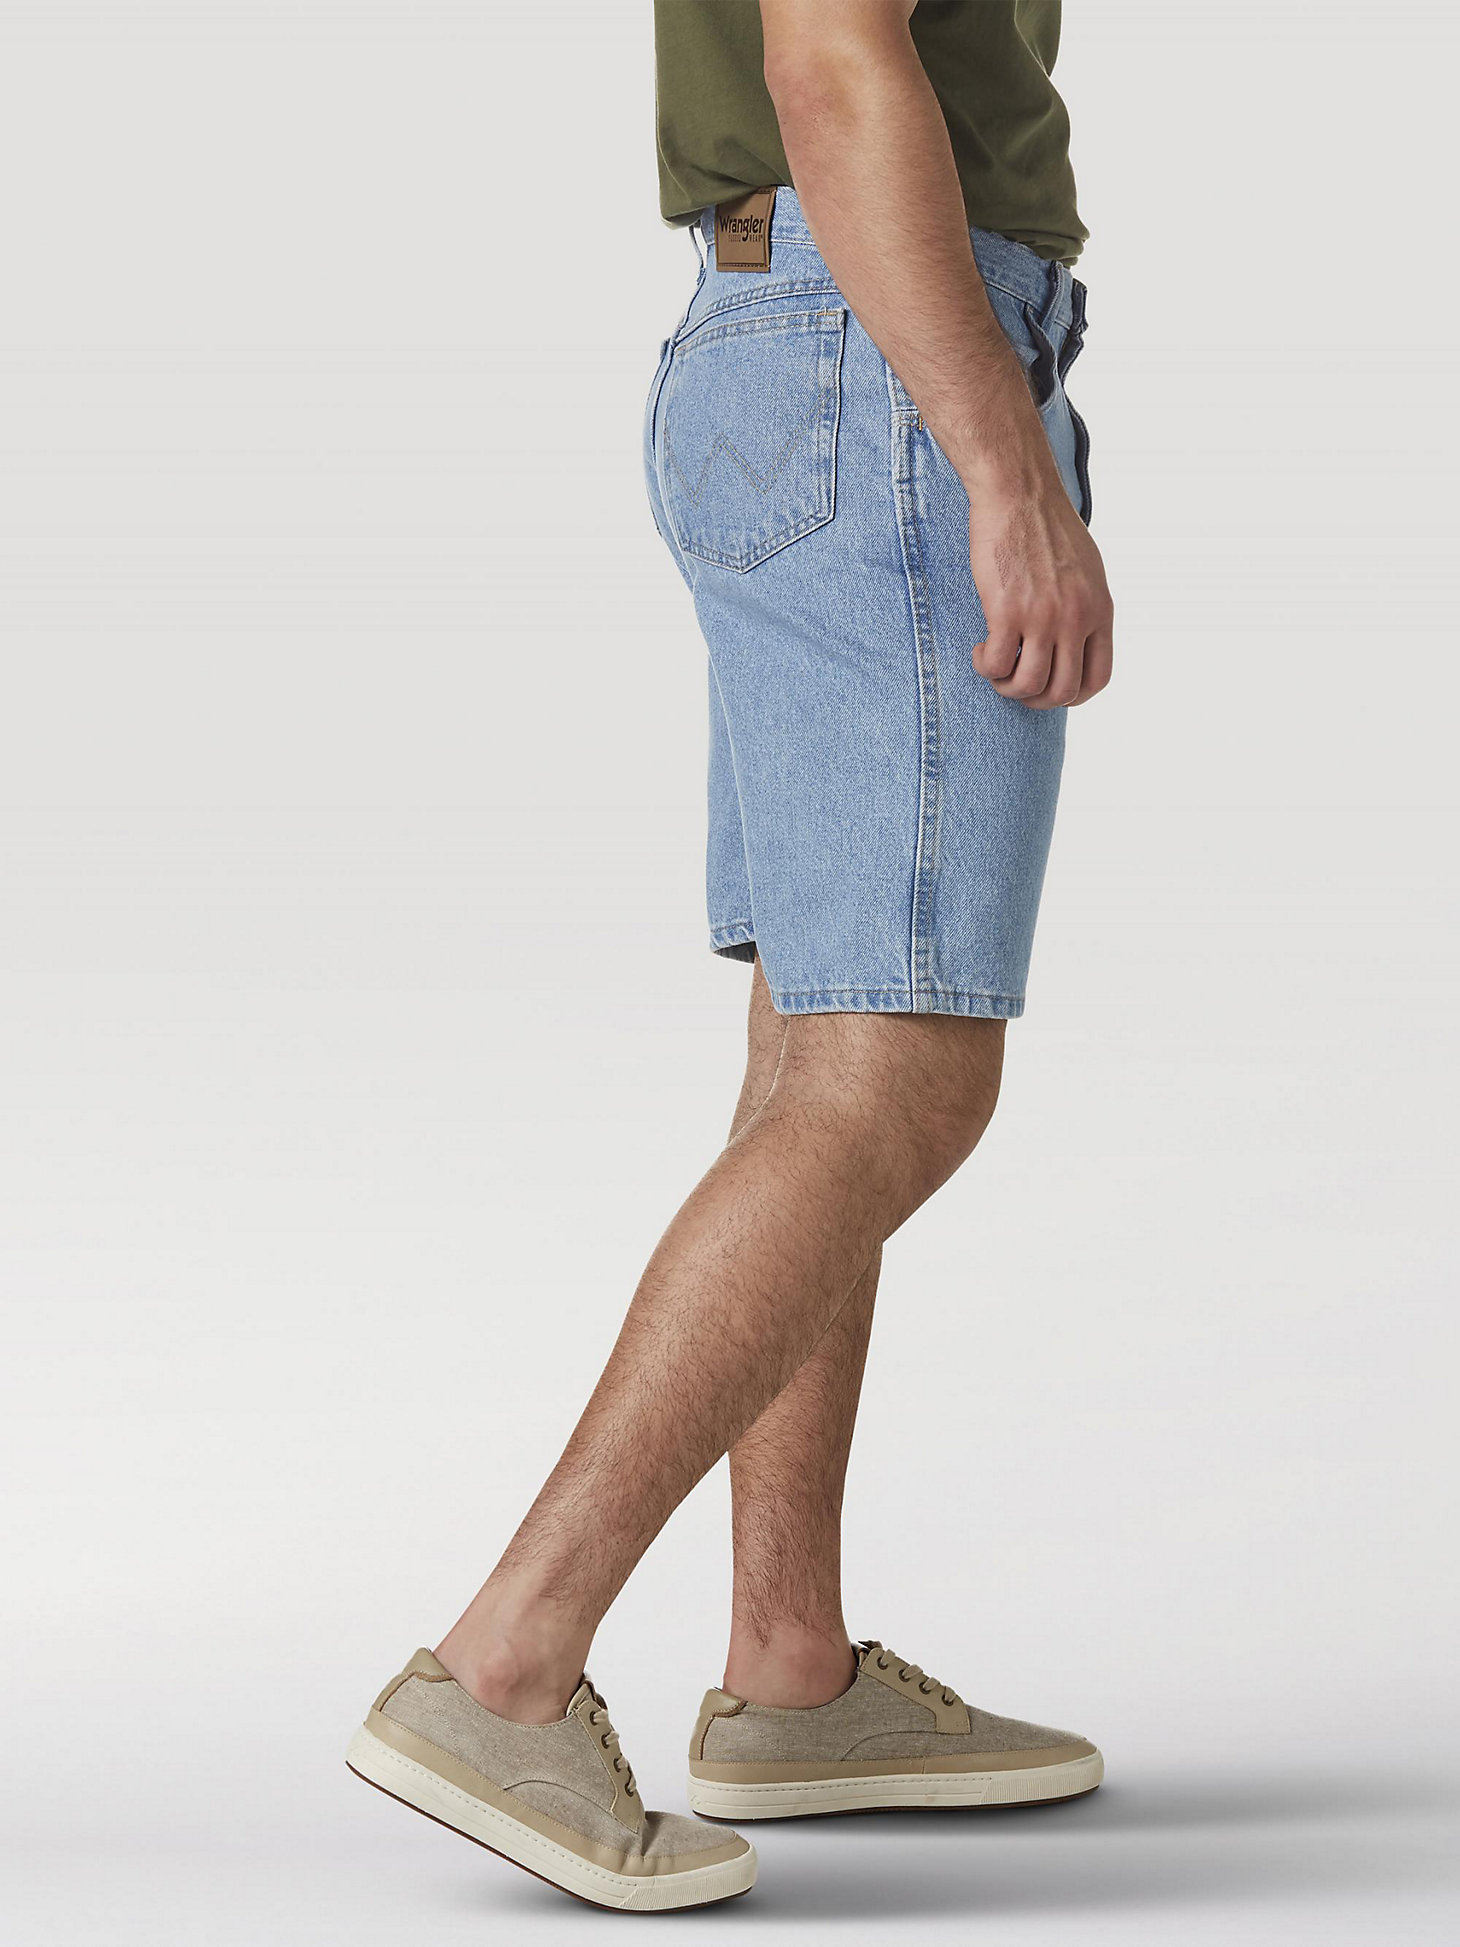 Wrangler Rugged Wear® Relaxed Fit Short in Vintage Indigo alternative view 1